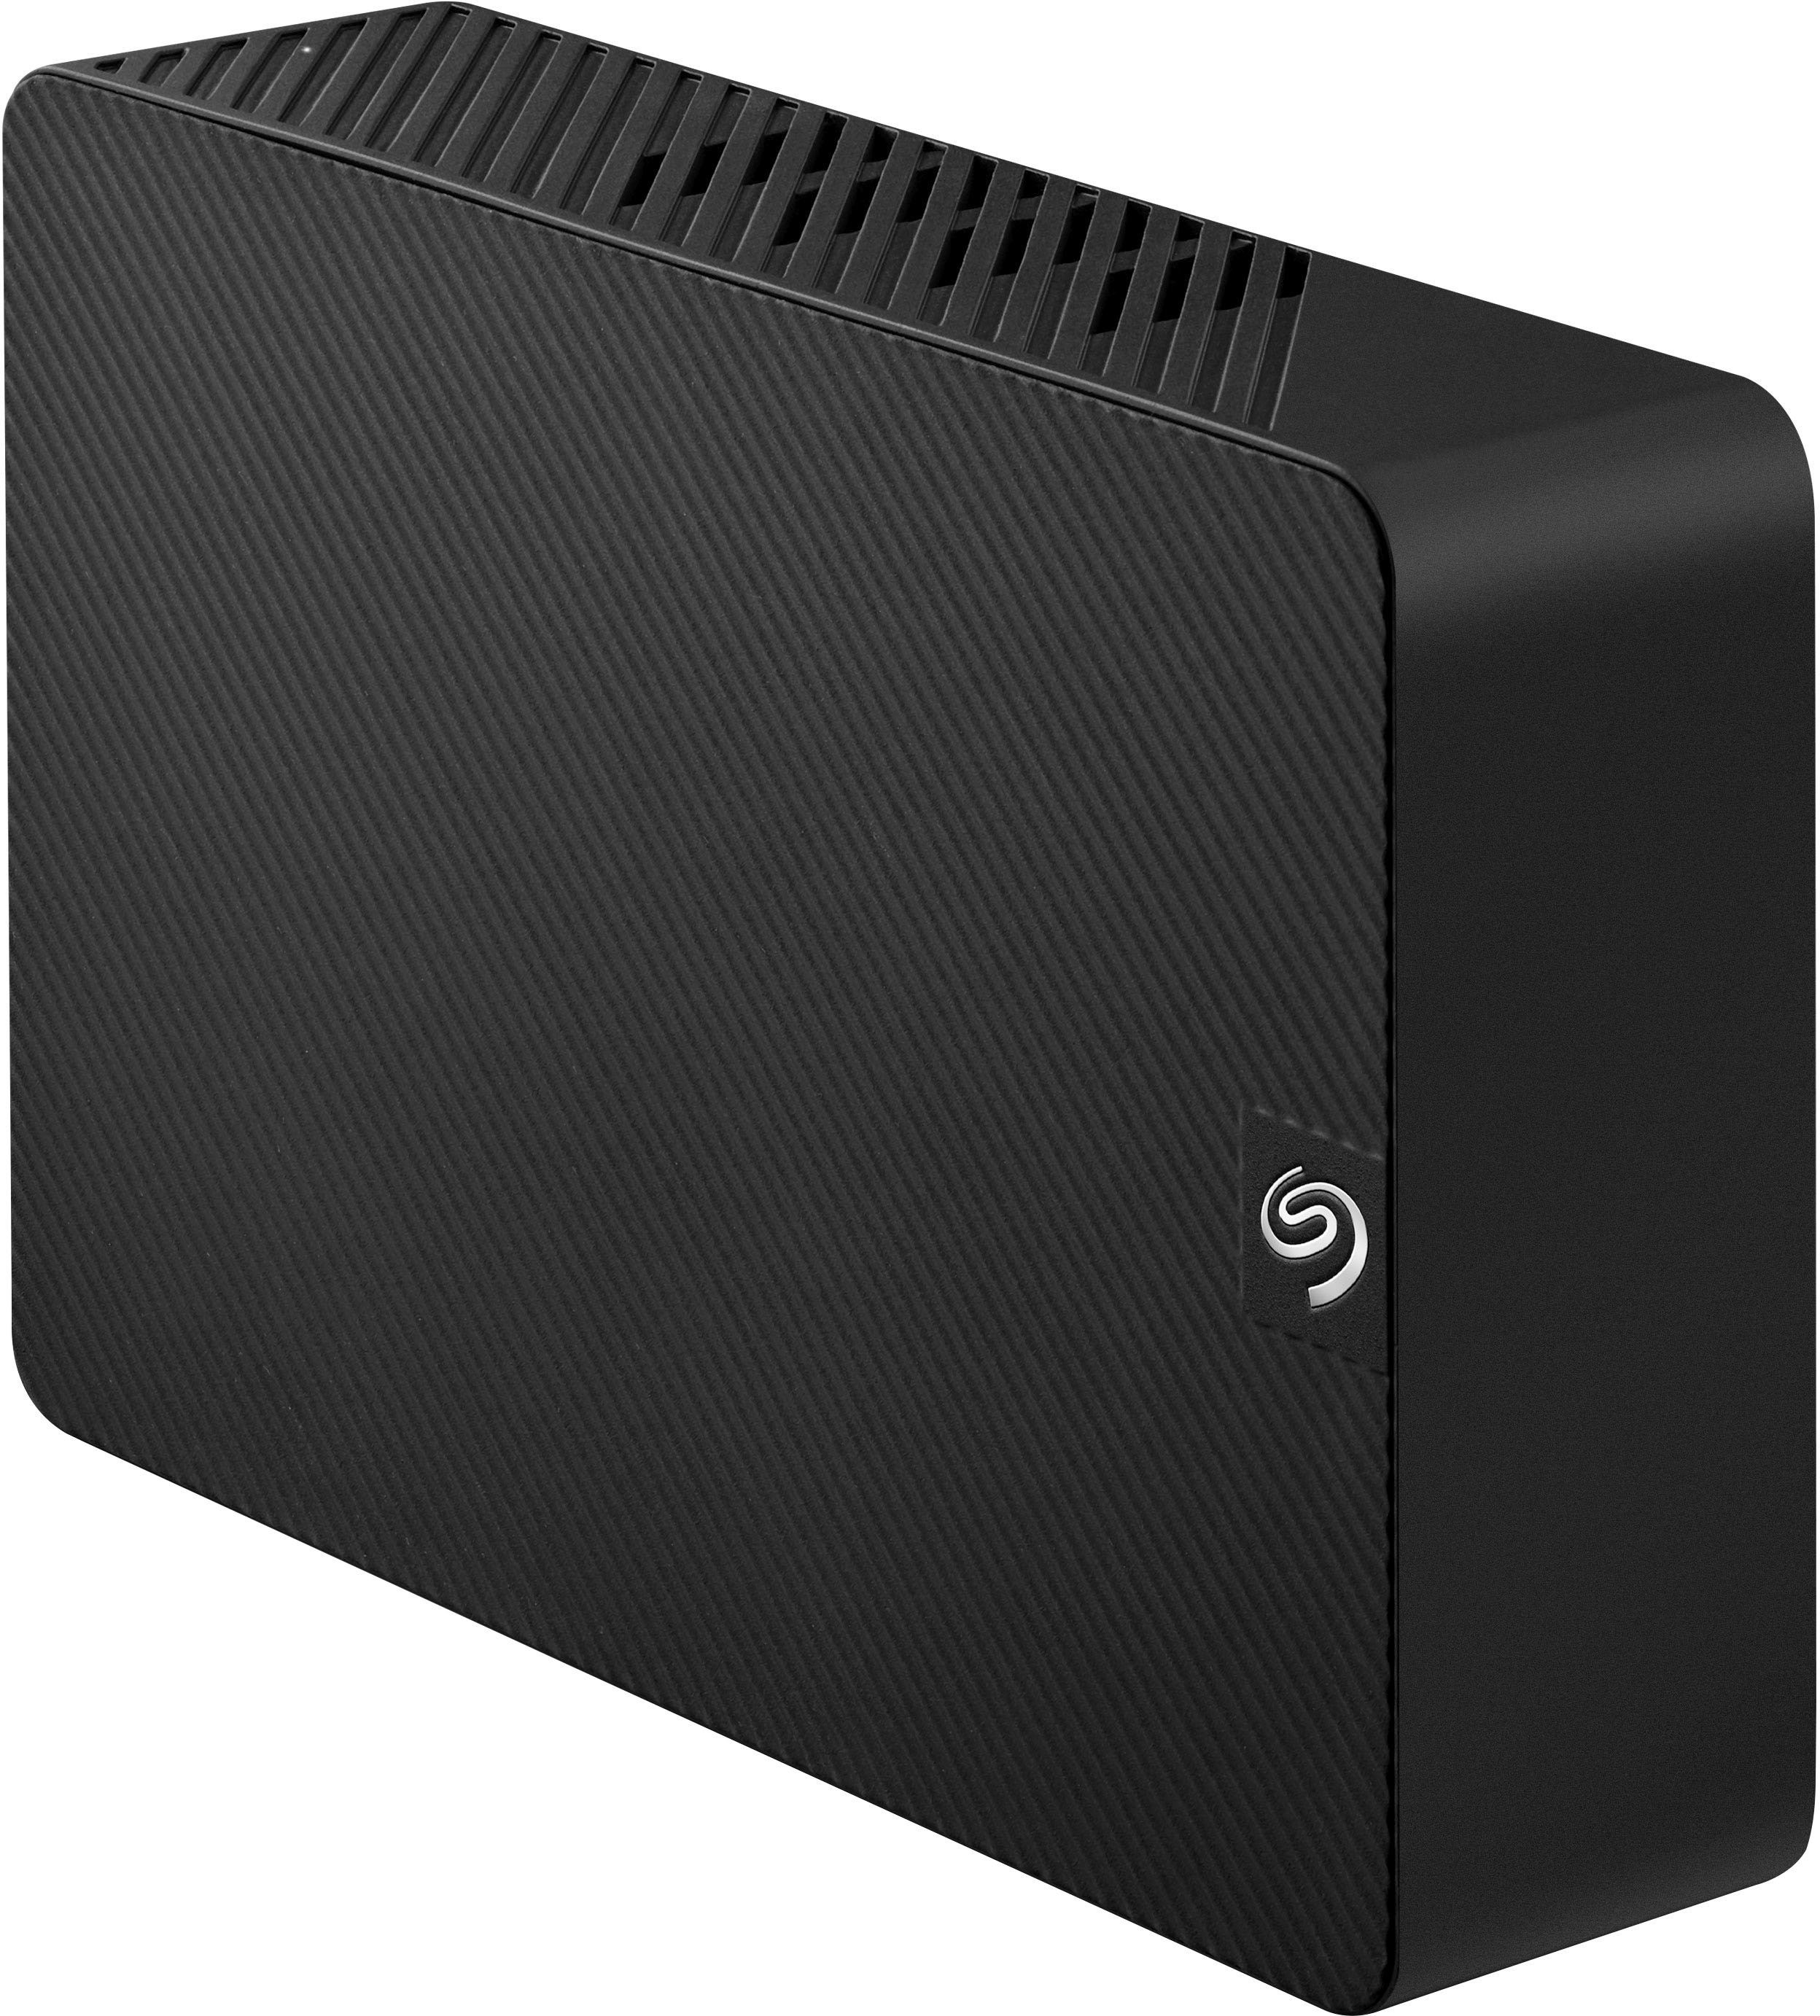 Seagate 16TB External USB 3.0 Desktop Hard Drive with Rescue Data Recovery Services Black STKP16000400 -